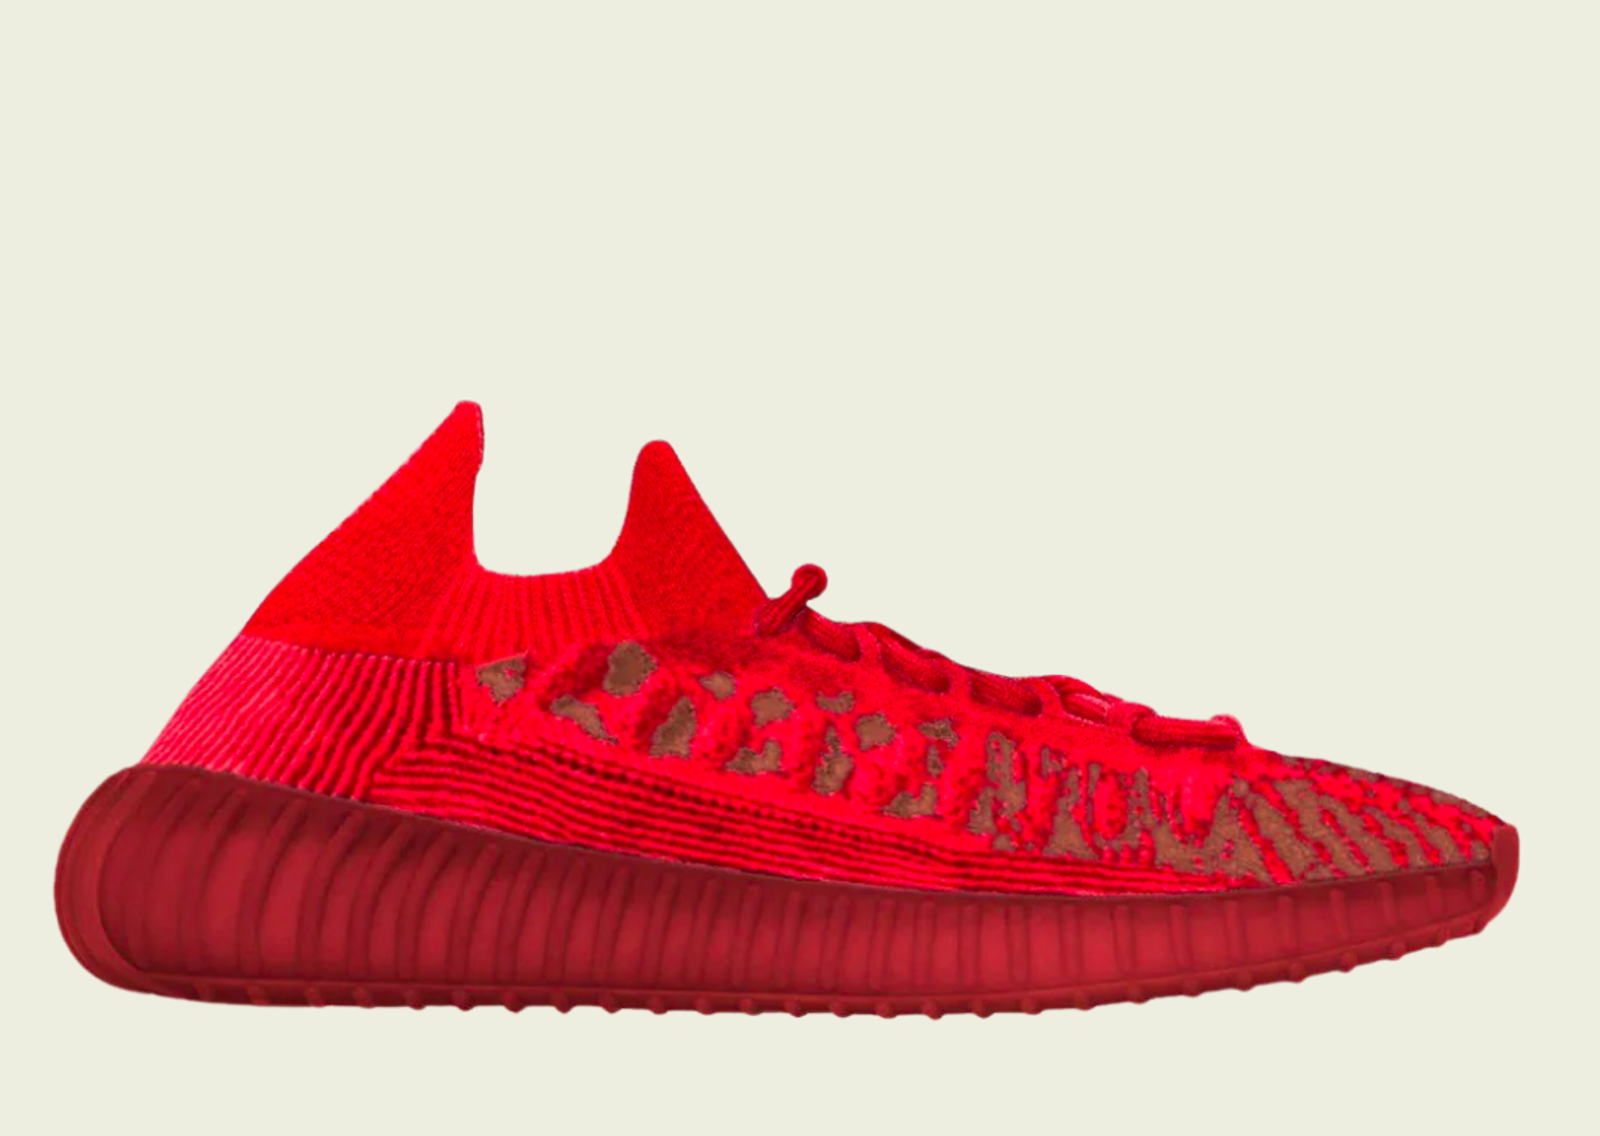 adidas Yeezy Boost 350 V2 CMPCT "Slate Red" Mockup